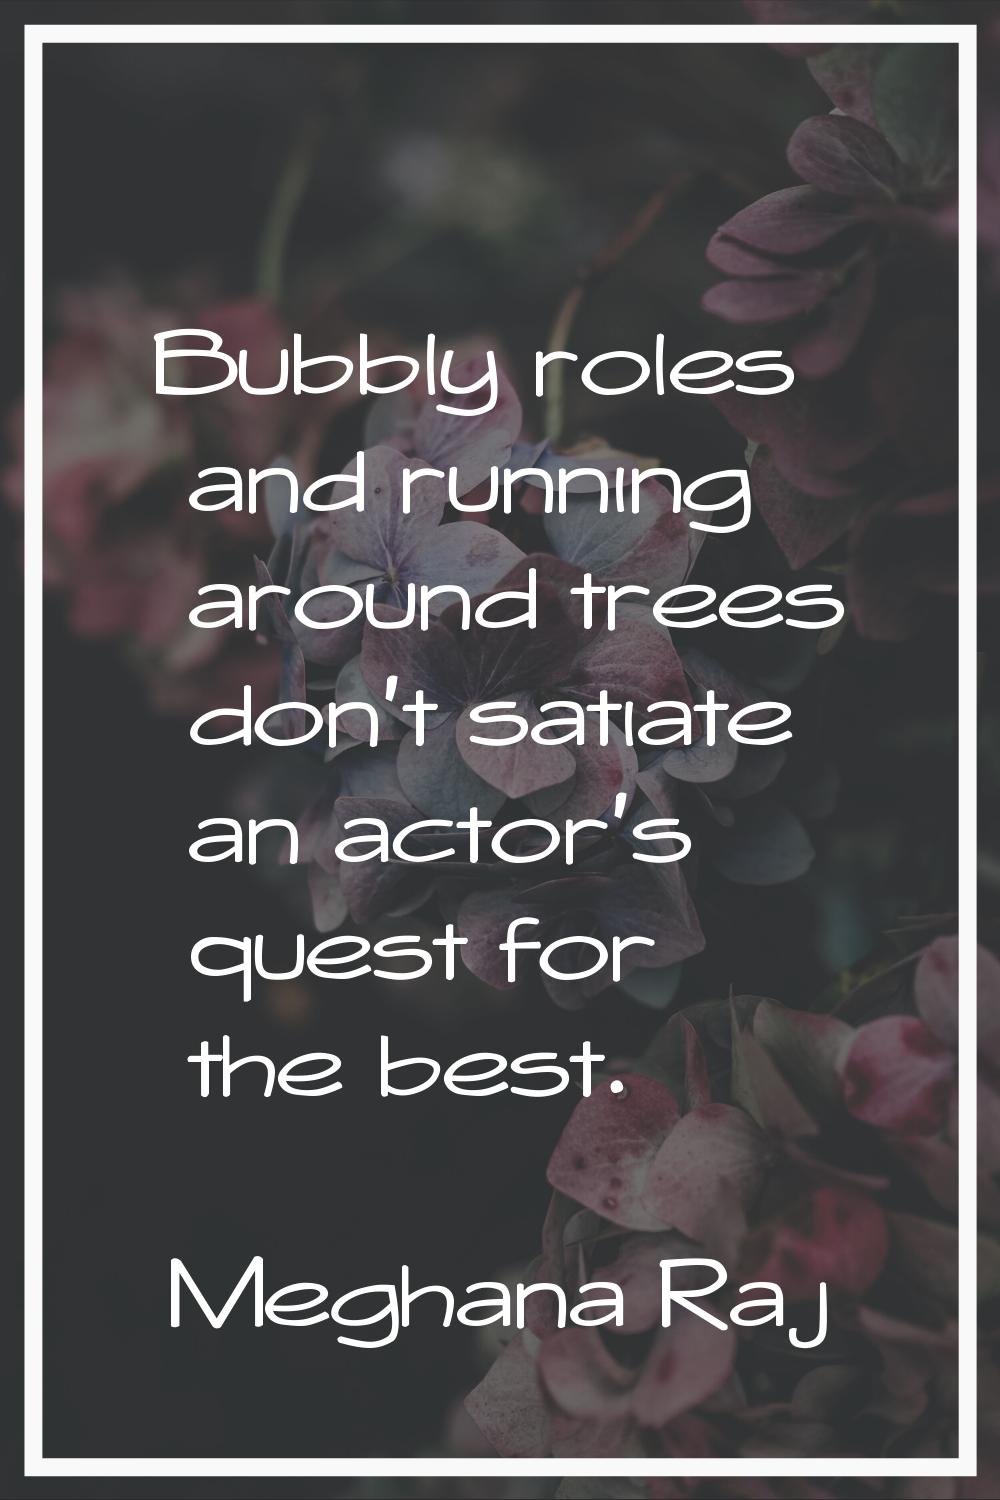 Bubbly roles and running around trees don't satiate an actor's quest for the best.